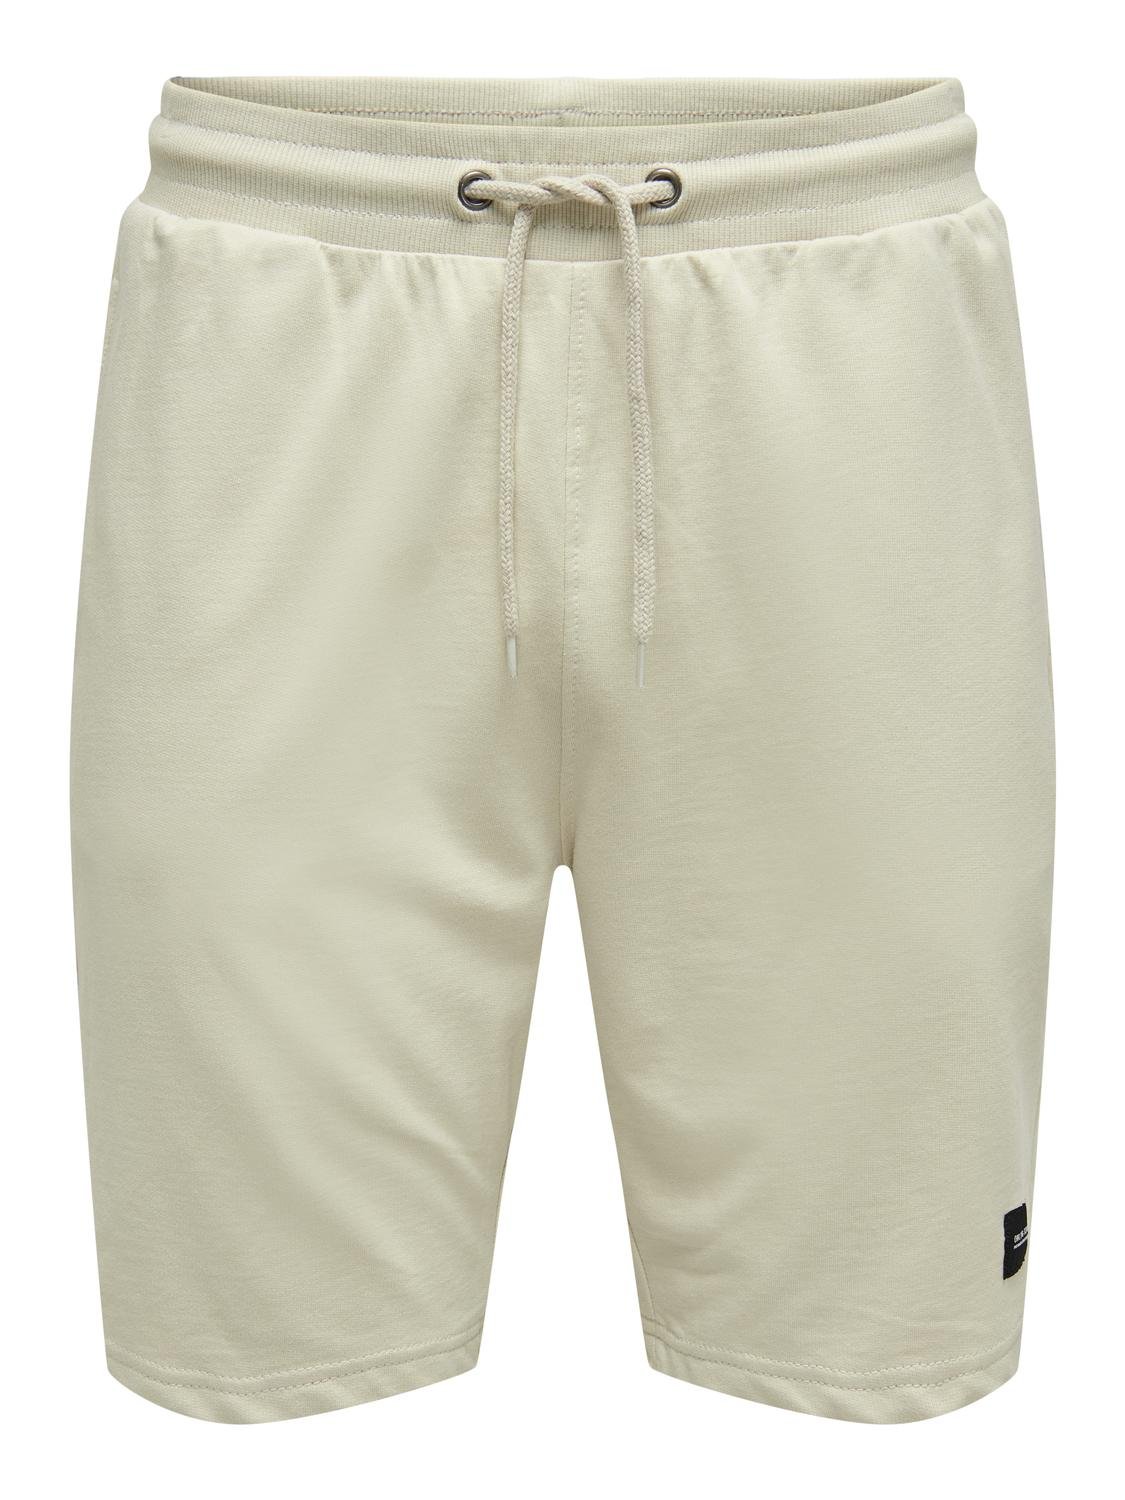 ONLY & SONS Regular Fit Mid waist Shorts -Pelican - 22015623